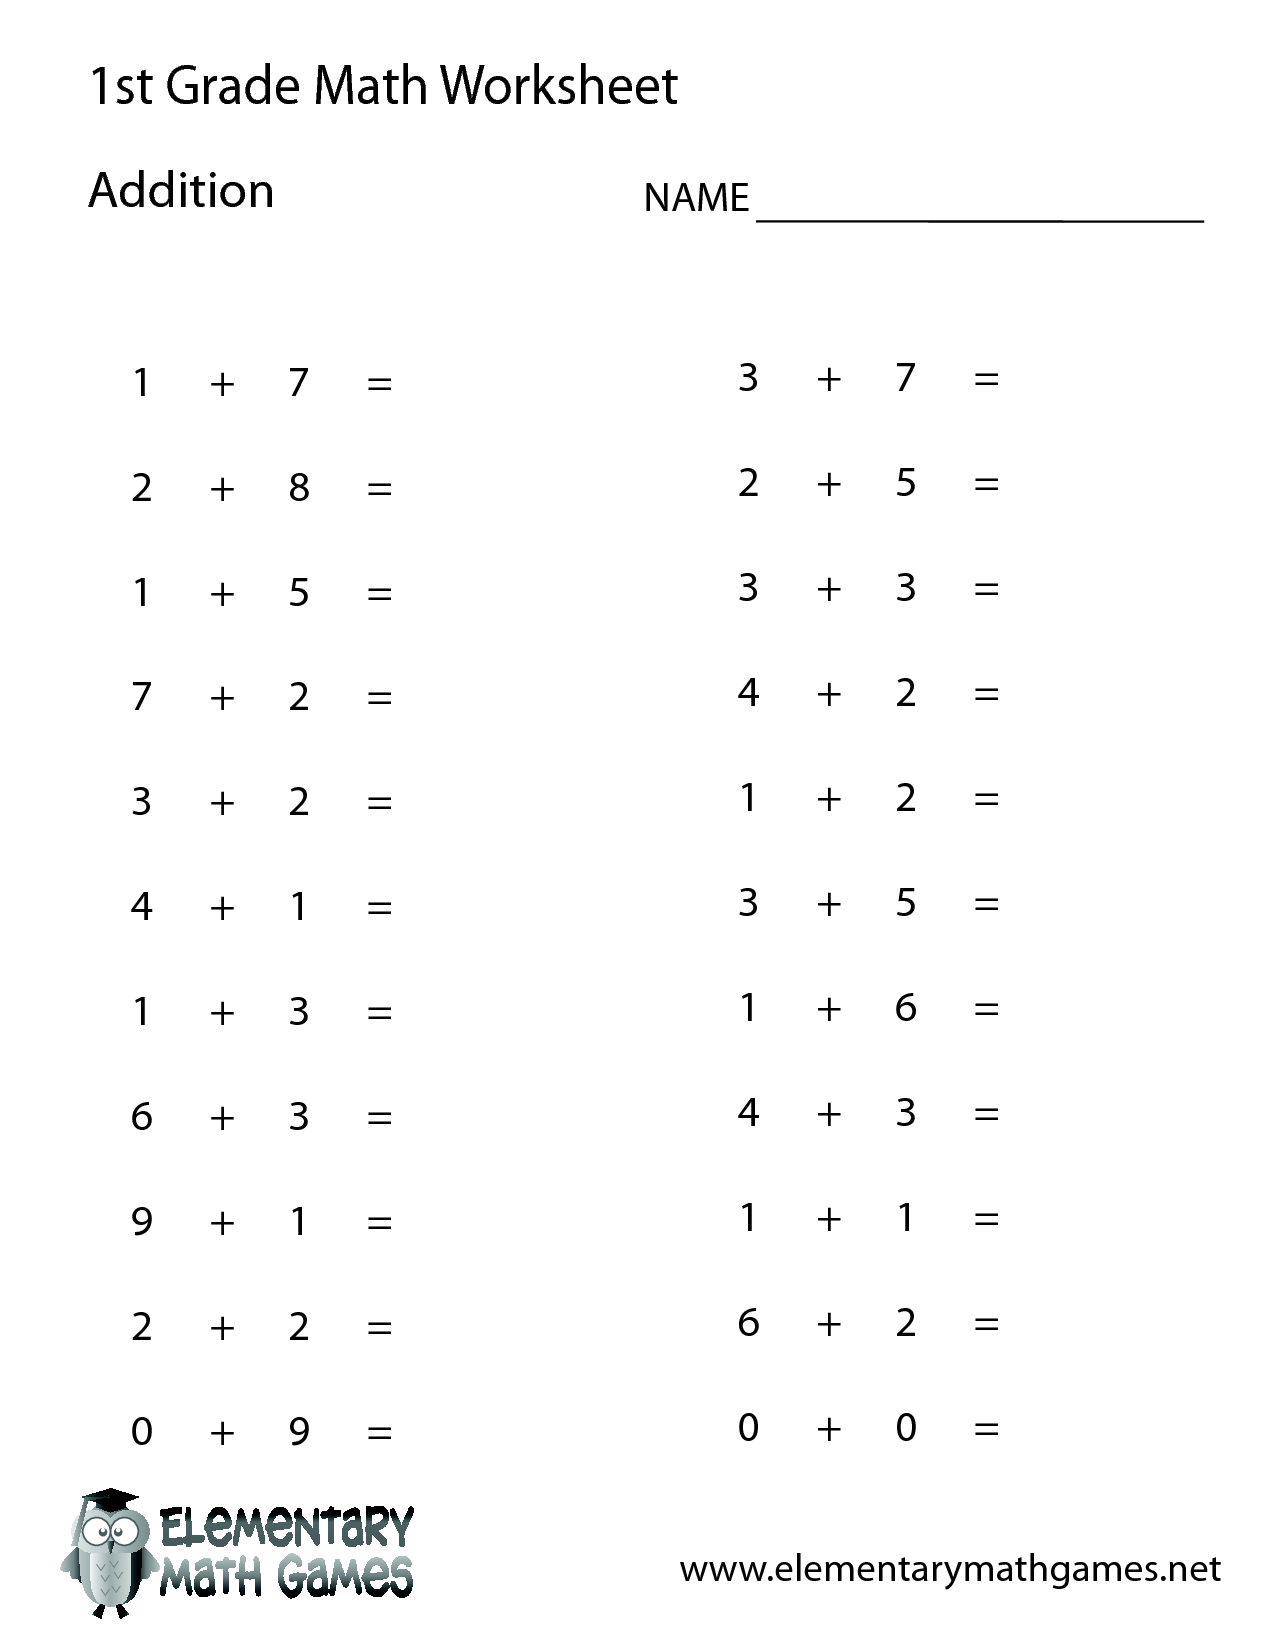 14 Best Images of Free Math Worksheets Elementary - Math Addition and